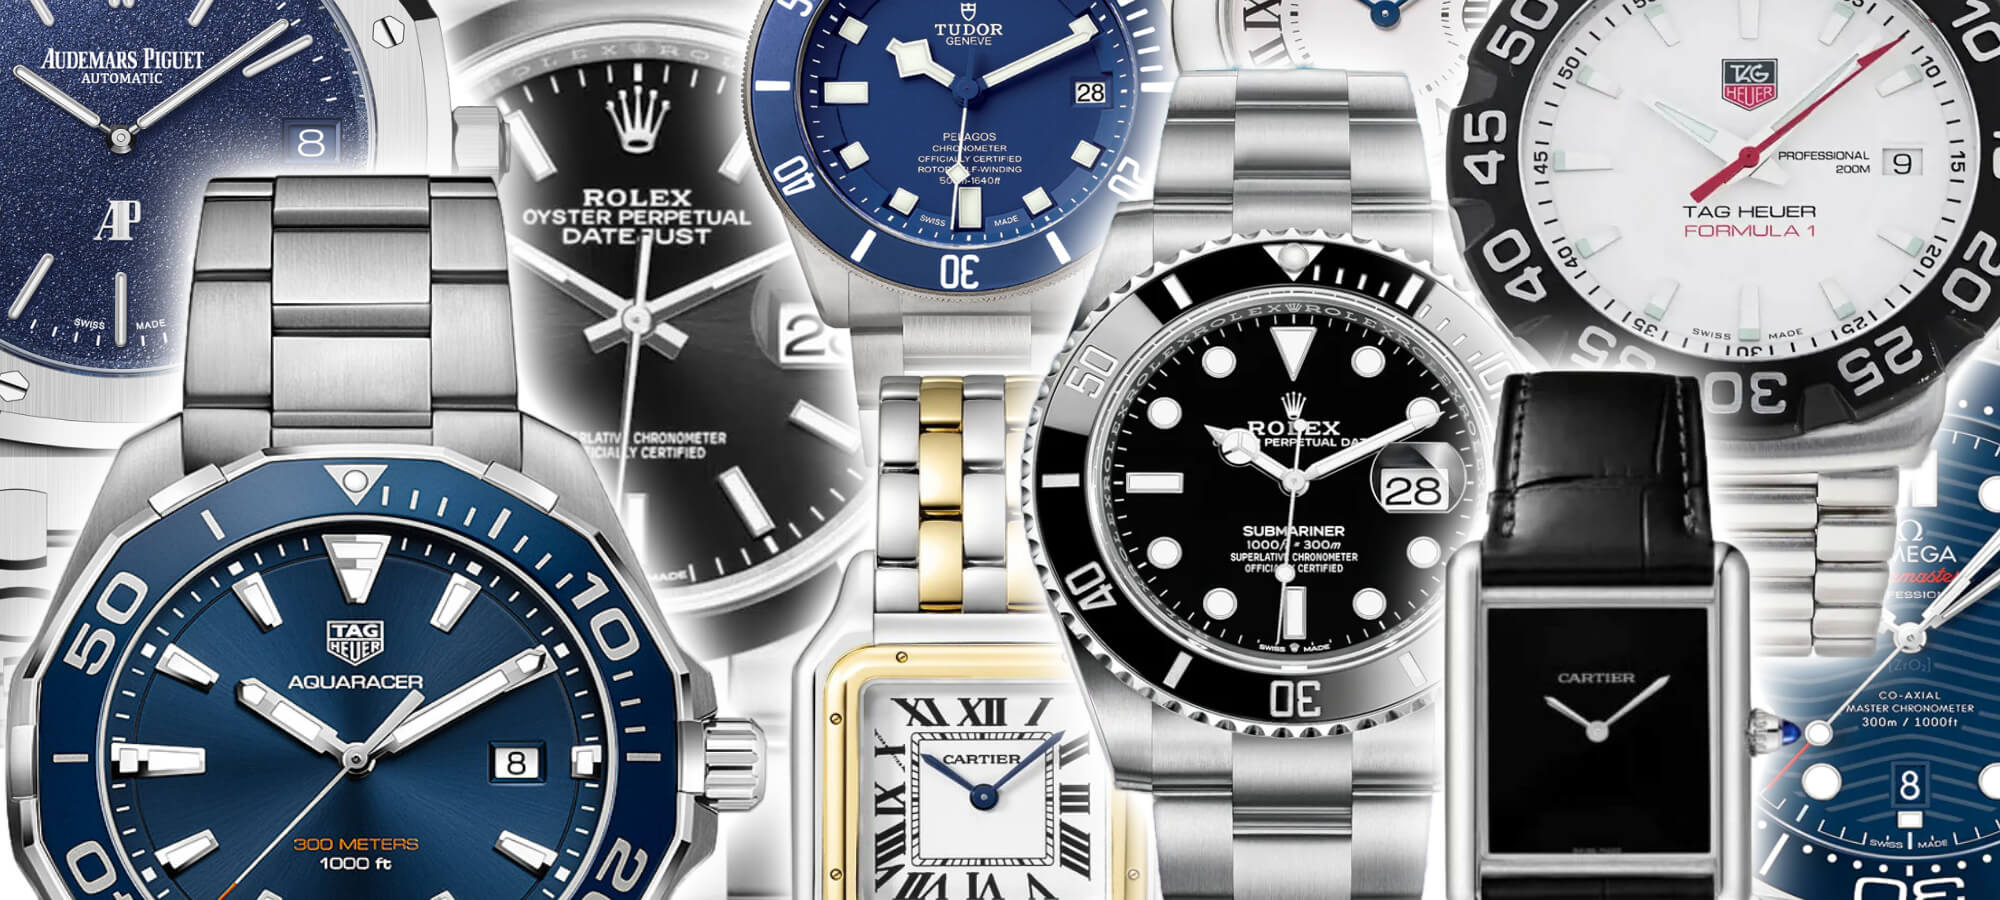 HIS AND HERS LUXURY WATCHES - TISSOT, RADO, BREITLING & TUDOR - YouTube